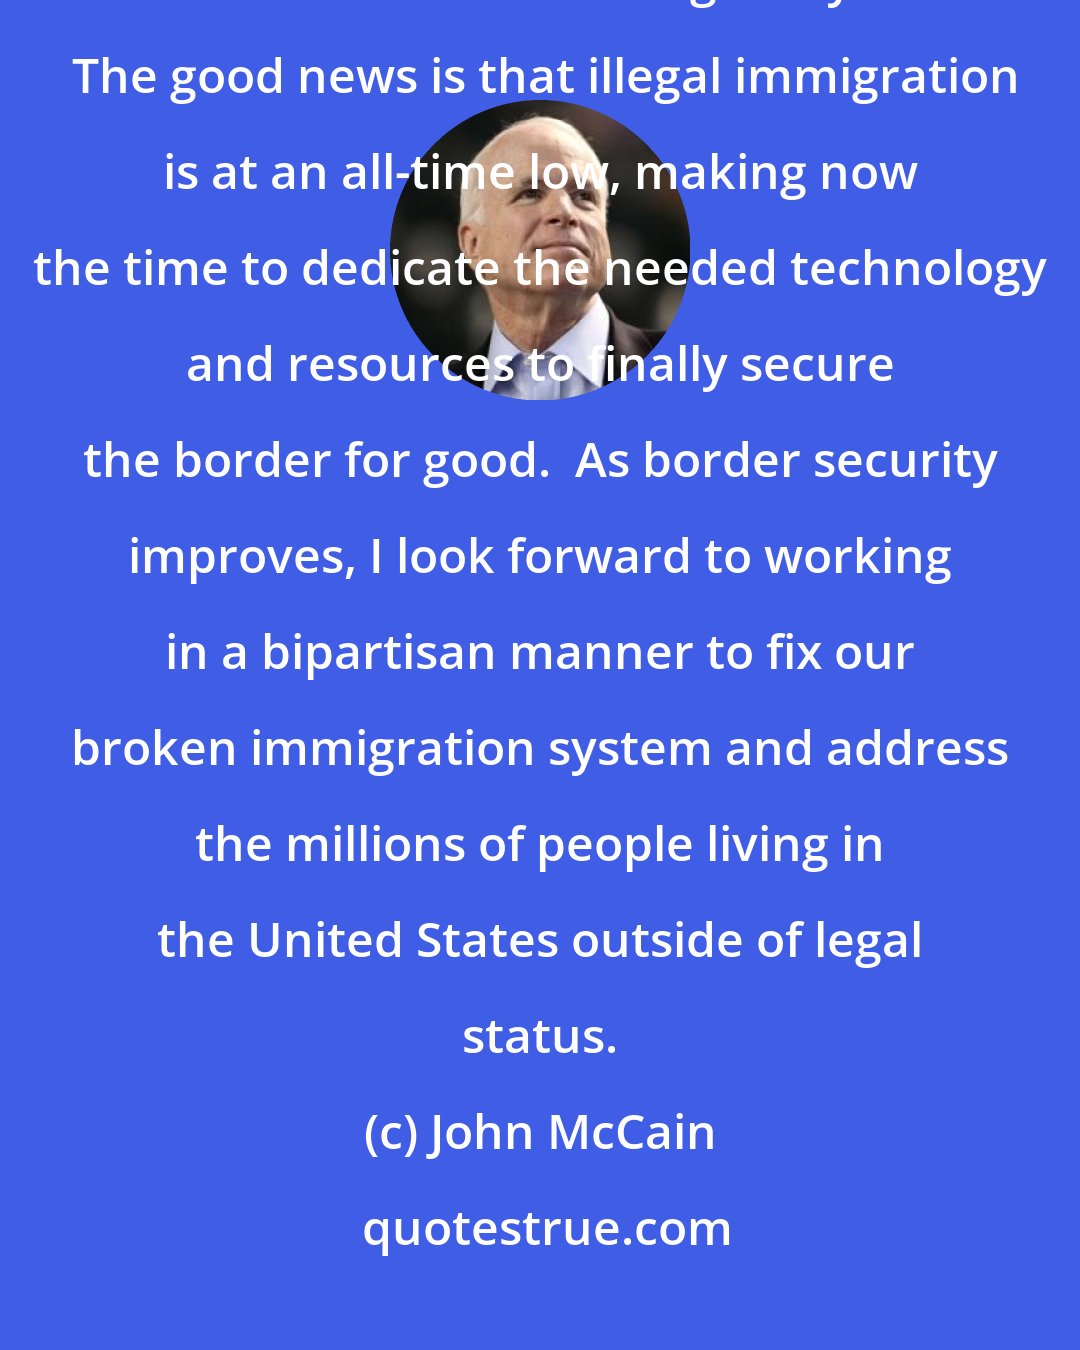 John McCain: Immigration and border security remain critical issues that I am committed to addressing this year.  The good news is that illegal immigration is at an all-time low, making now the time to dedicate the needed technology and resources to finally secure the border for good.  As border security improves, I look forward to working in a bipartisan manner to fix our broken immigration system and address the millions of people living in the United States outside of legal status.